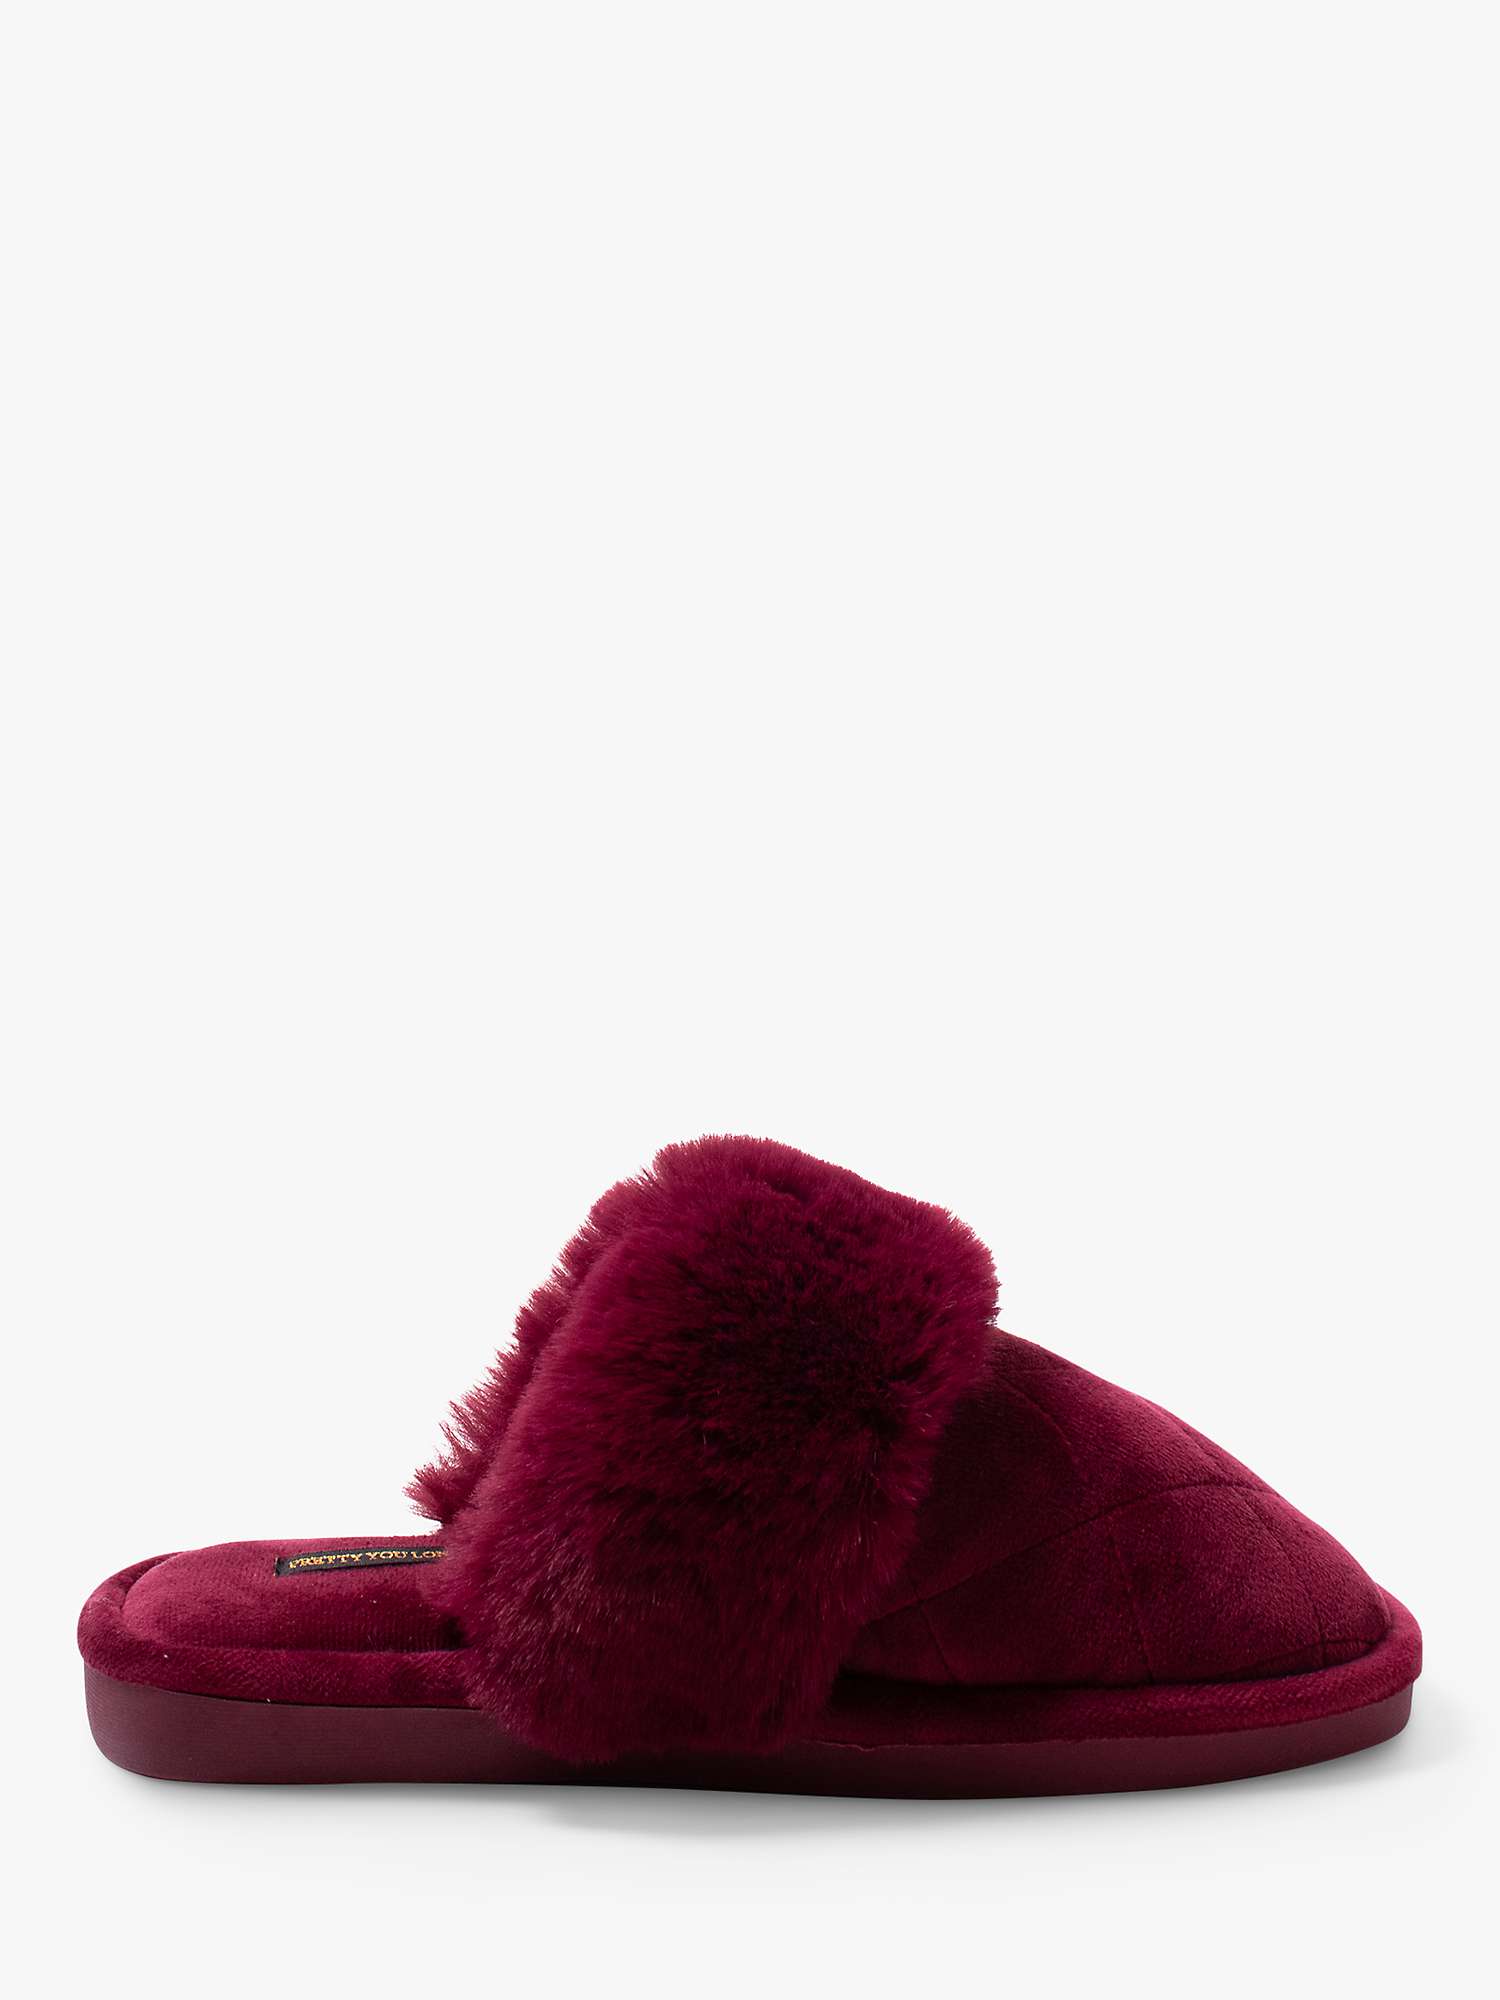 Buy Pretty You London Gigi Quilted Mule Slippers Online at johnlewis.com